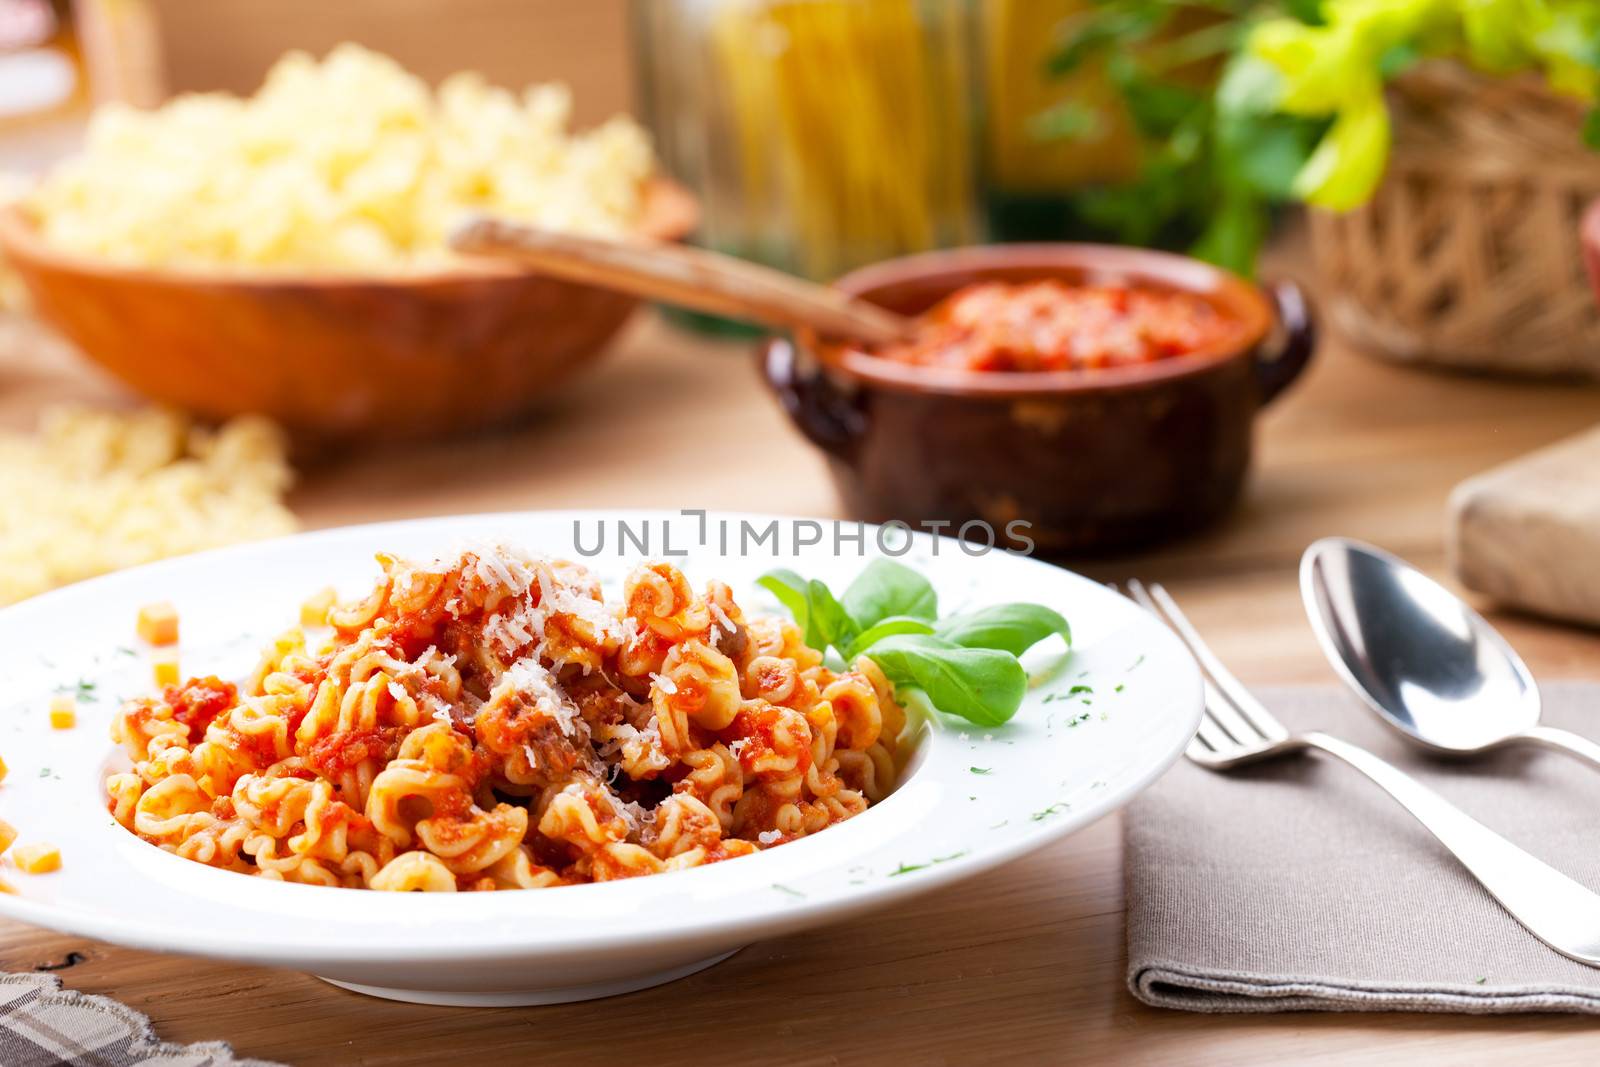 Pasta and tomato sauce by stokkete